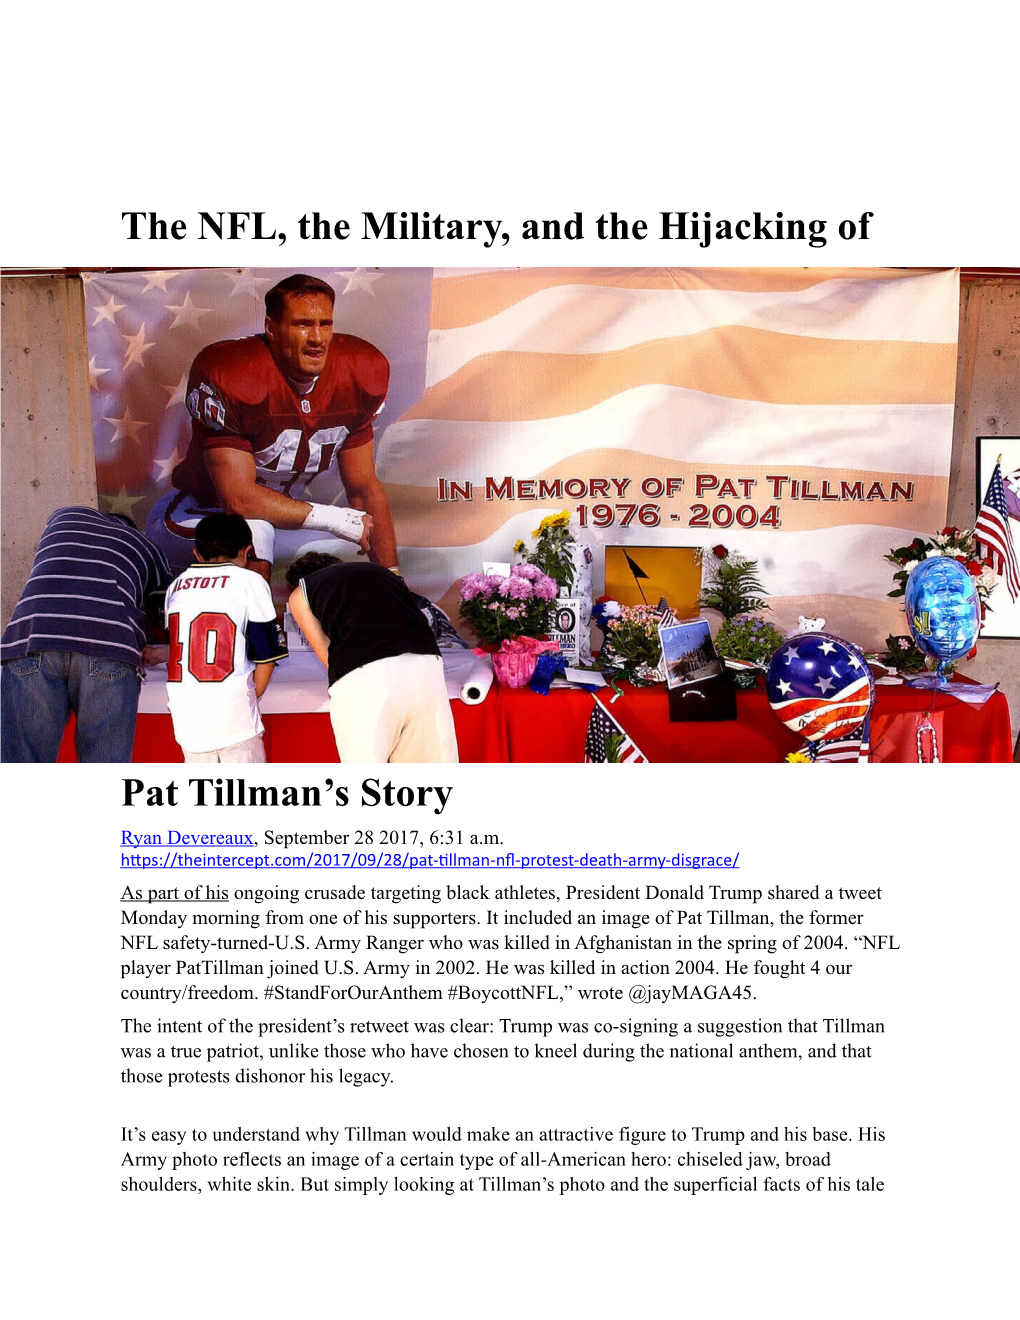 The NFL, the Military, and the Hijacking of Pat Tillman